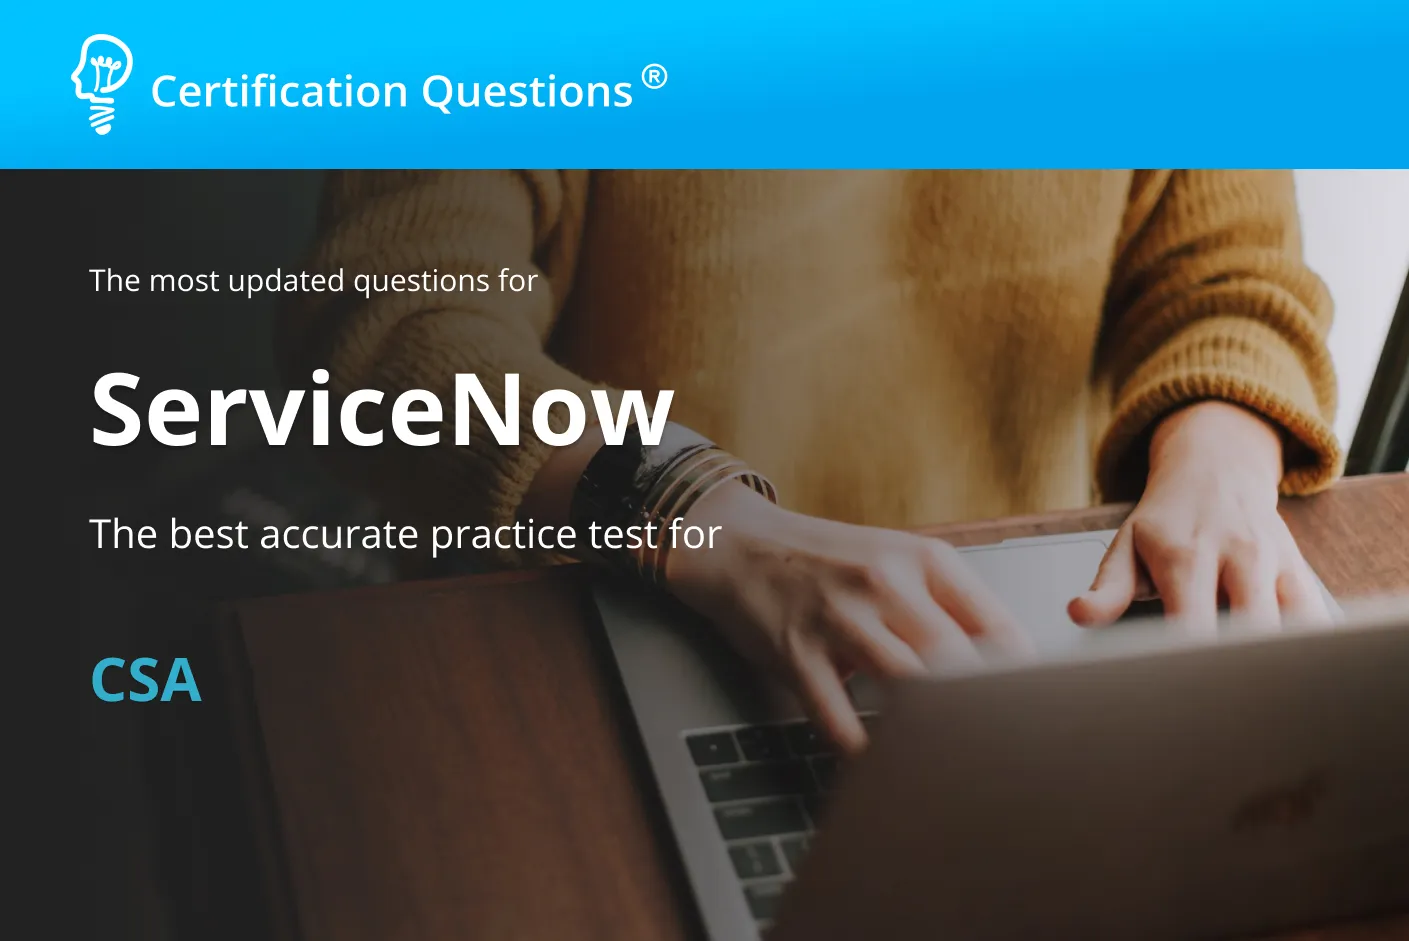 This image is related to Servicenow CSA practice exam in the USA